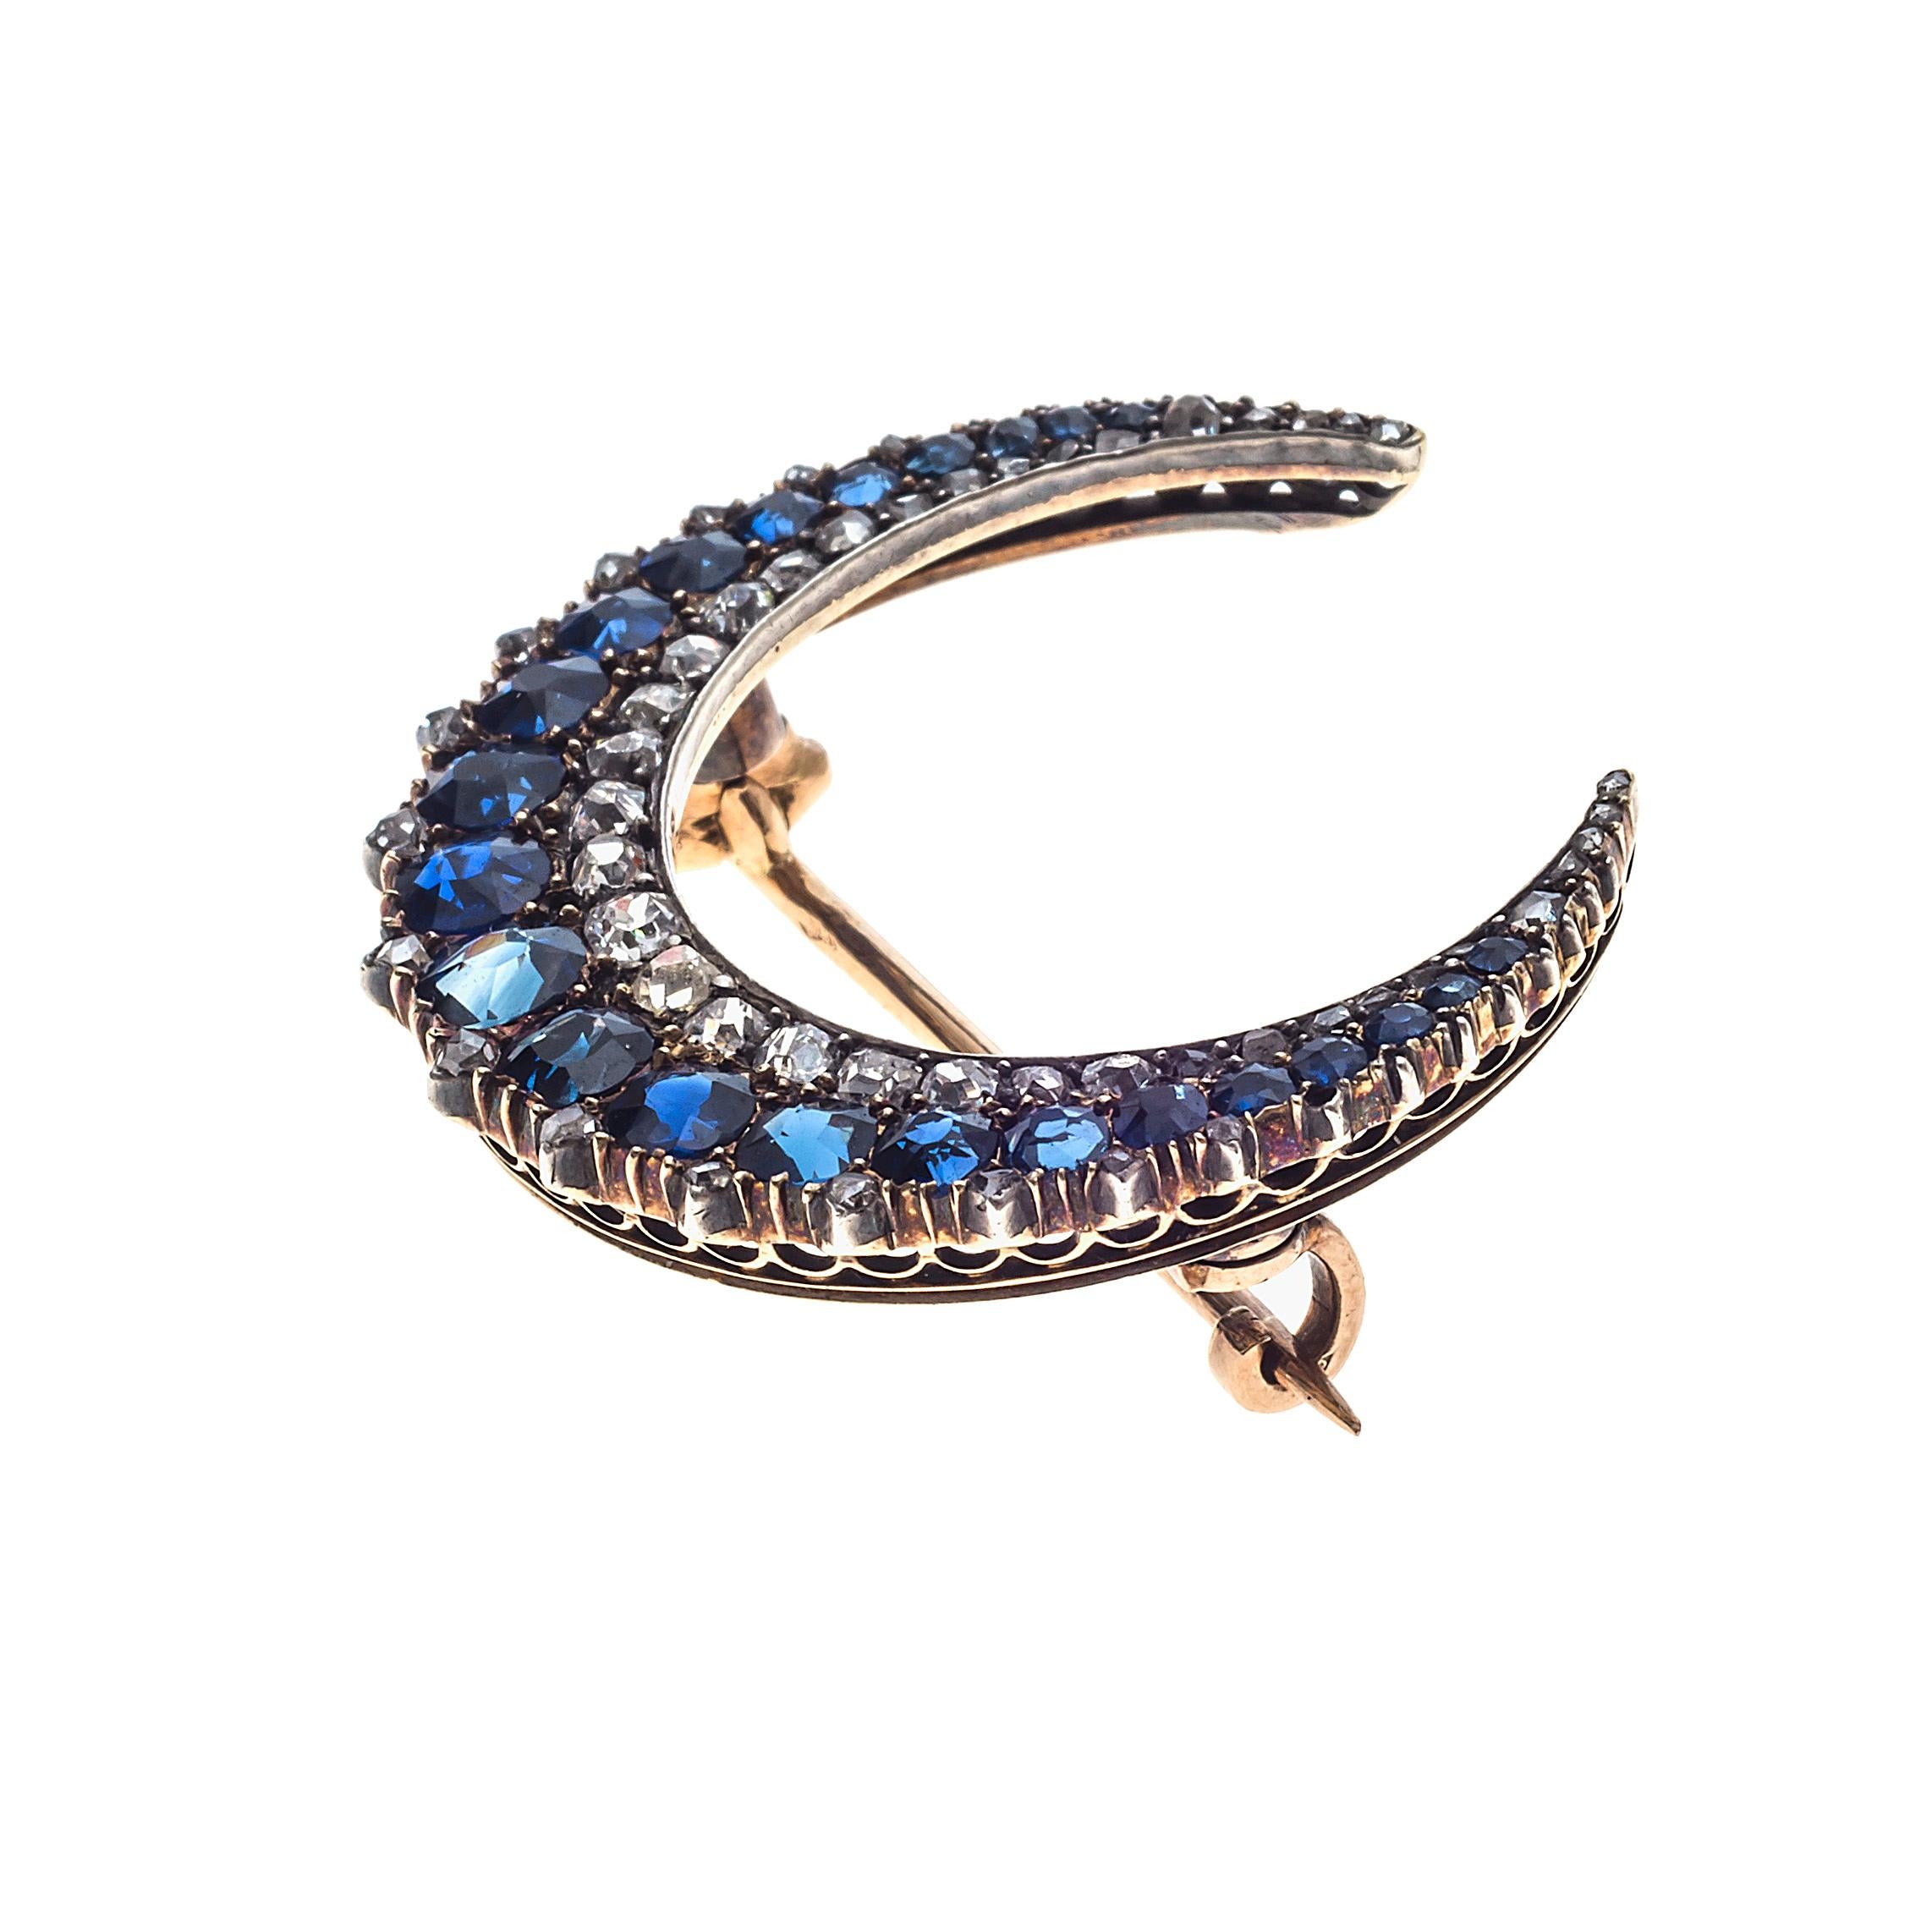 Very fine brooch of a waxing moon in form of a crescent set with natural sapphires and old cut and rose cut diamonds (0,57 ct). Twenty-three round facetted sapphires (1.95 ct) and fifty-two old cut diamonds (0.57 ct) mounted in silver backed in 18K